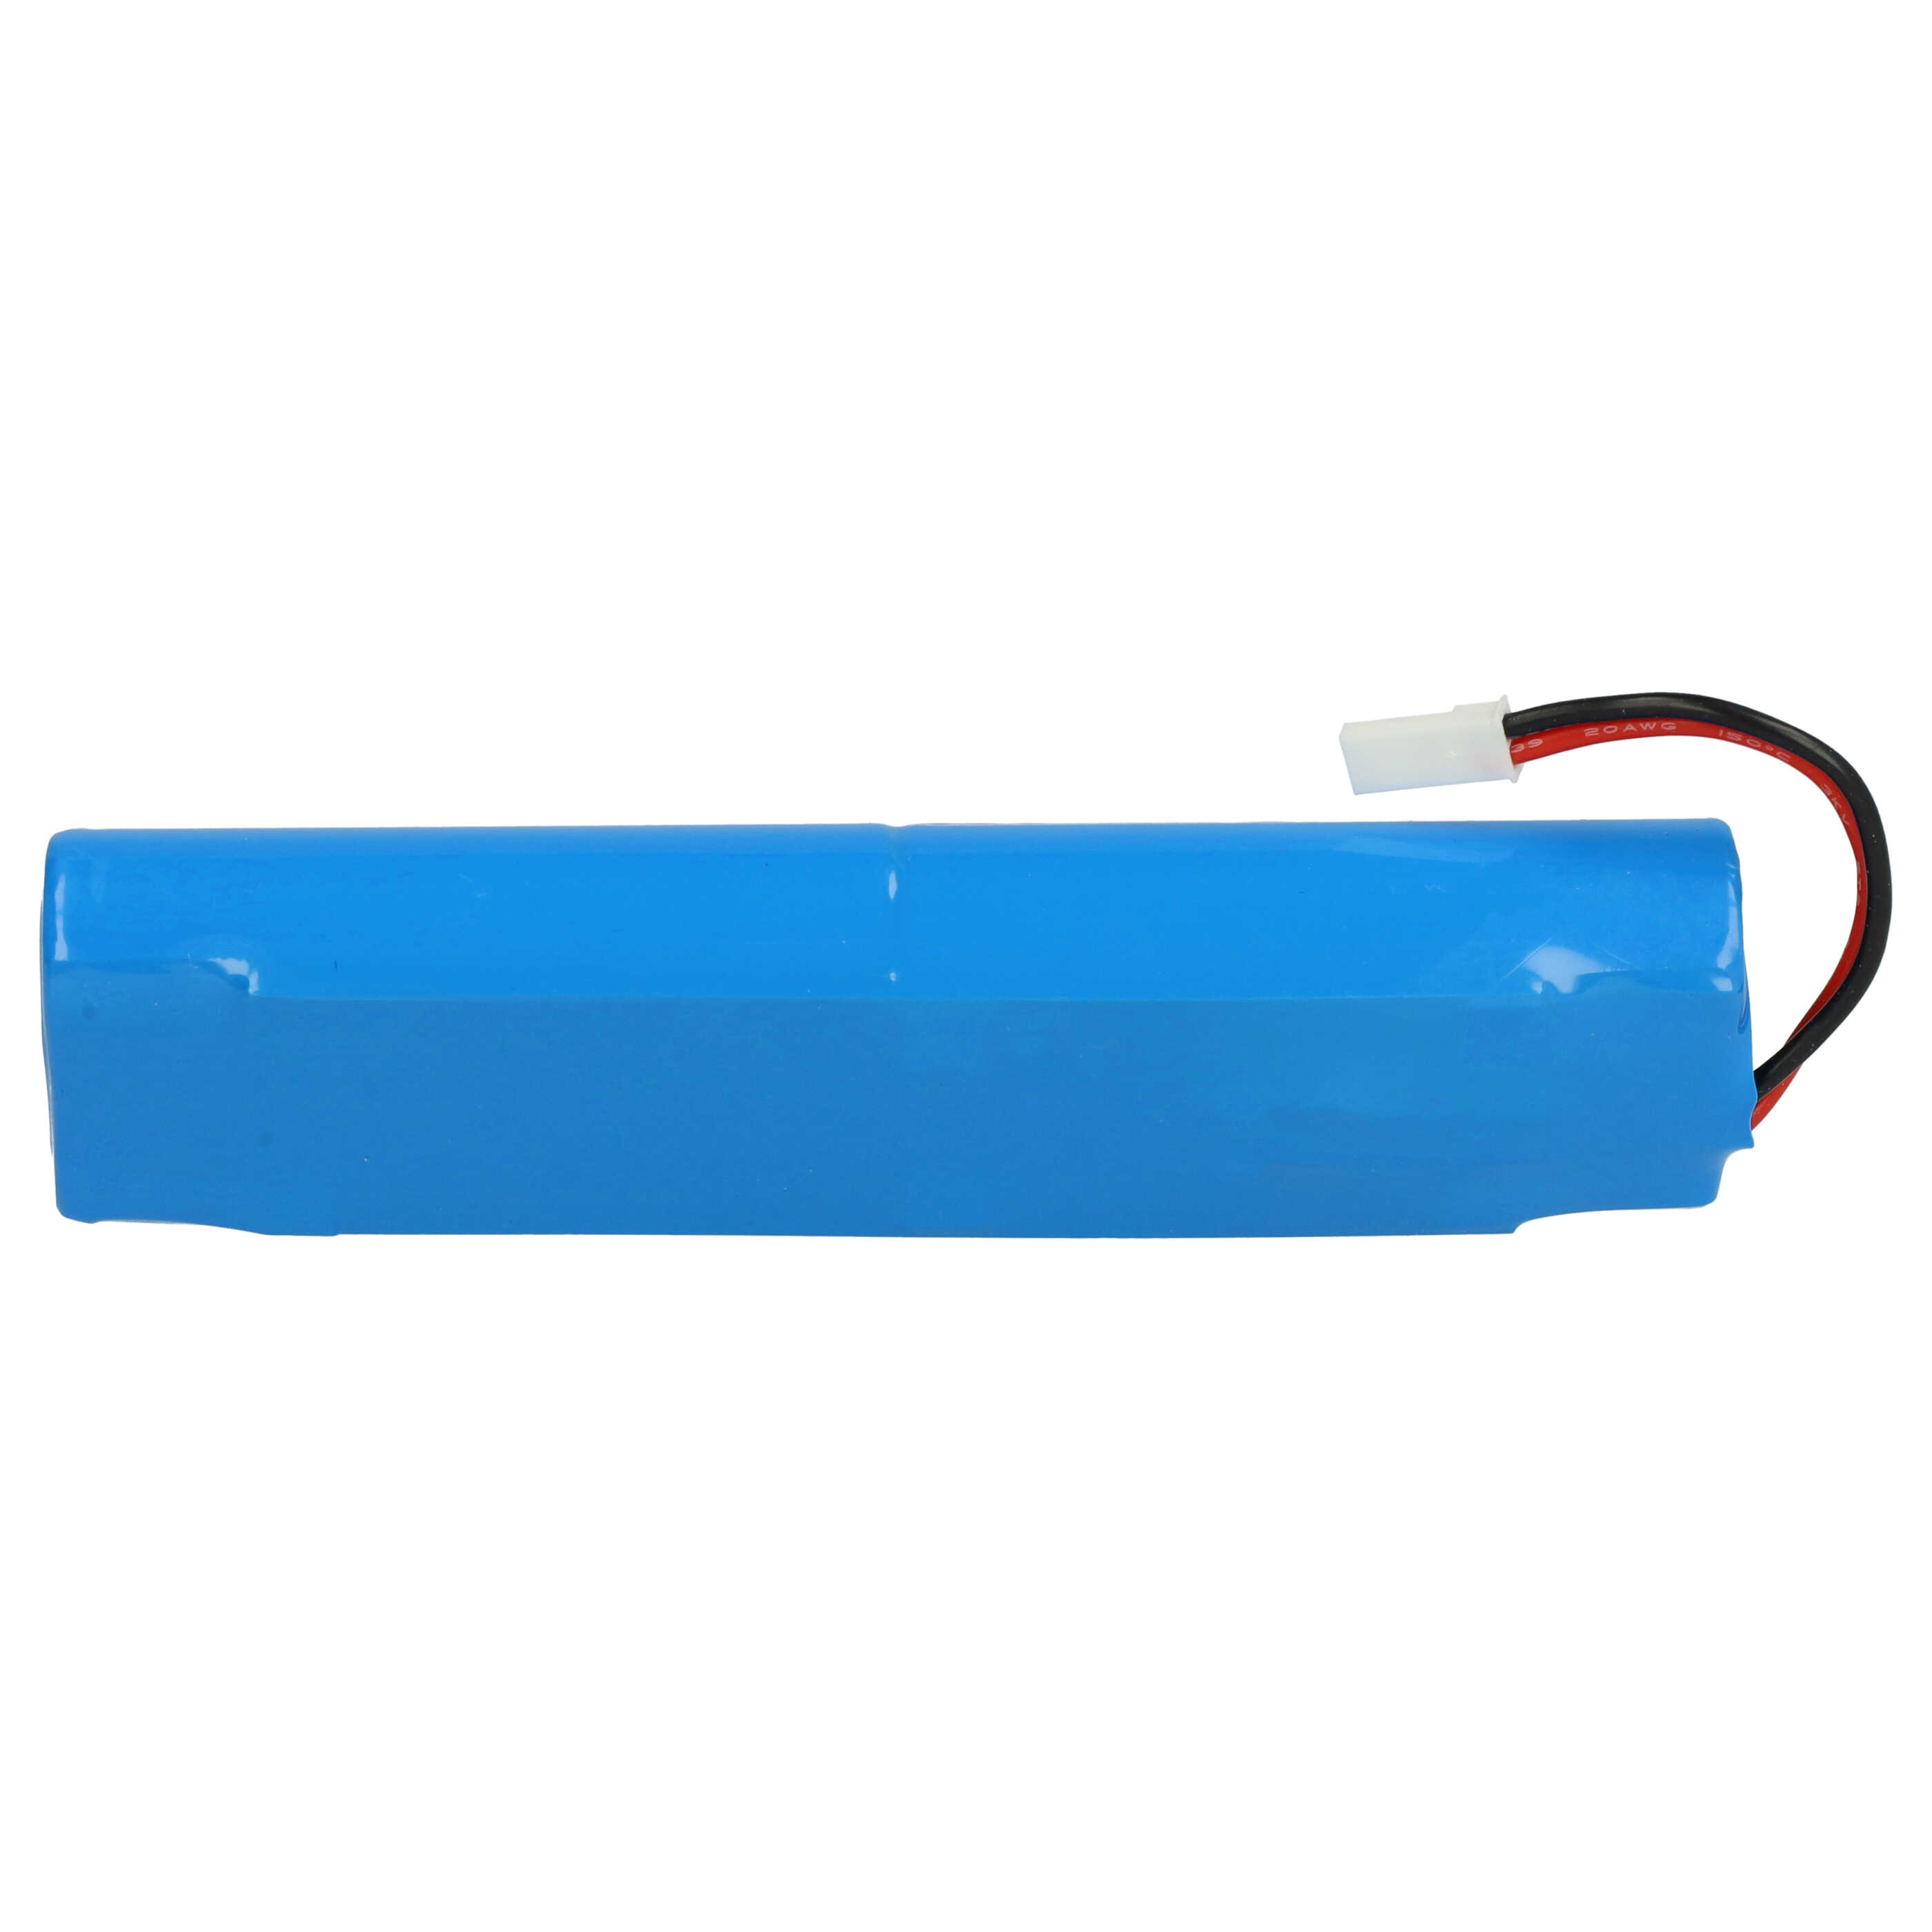 Battery Replacement for iLife Ay-18650B4, 18650B4-4S1P-AGX-2, SUN-INTE-202 for - 2200mAh, 14.4V, Li-Ion